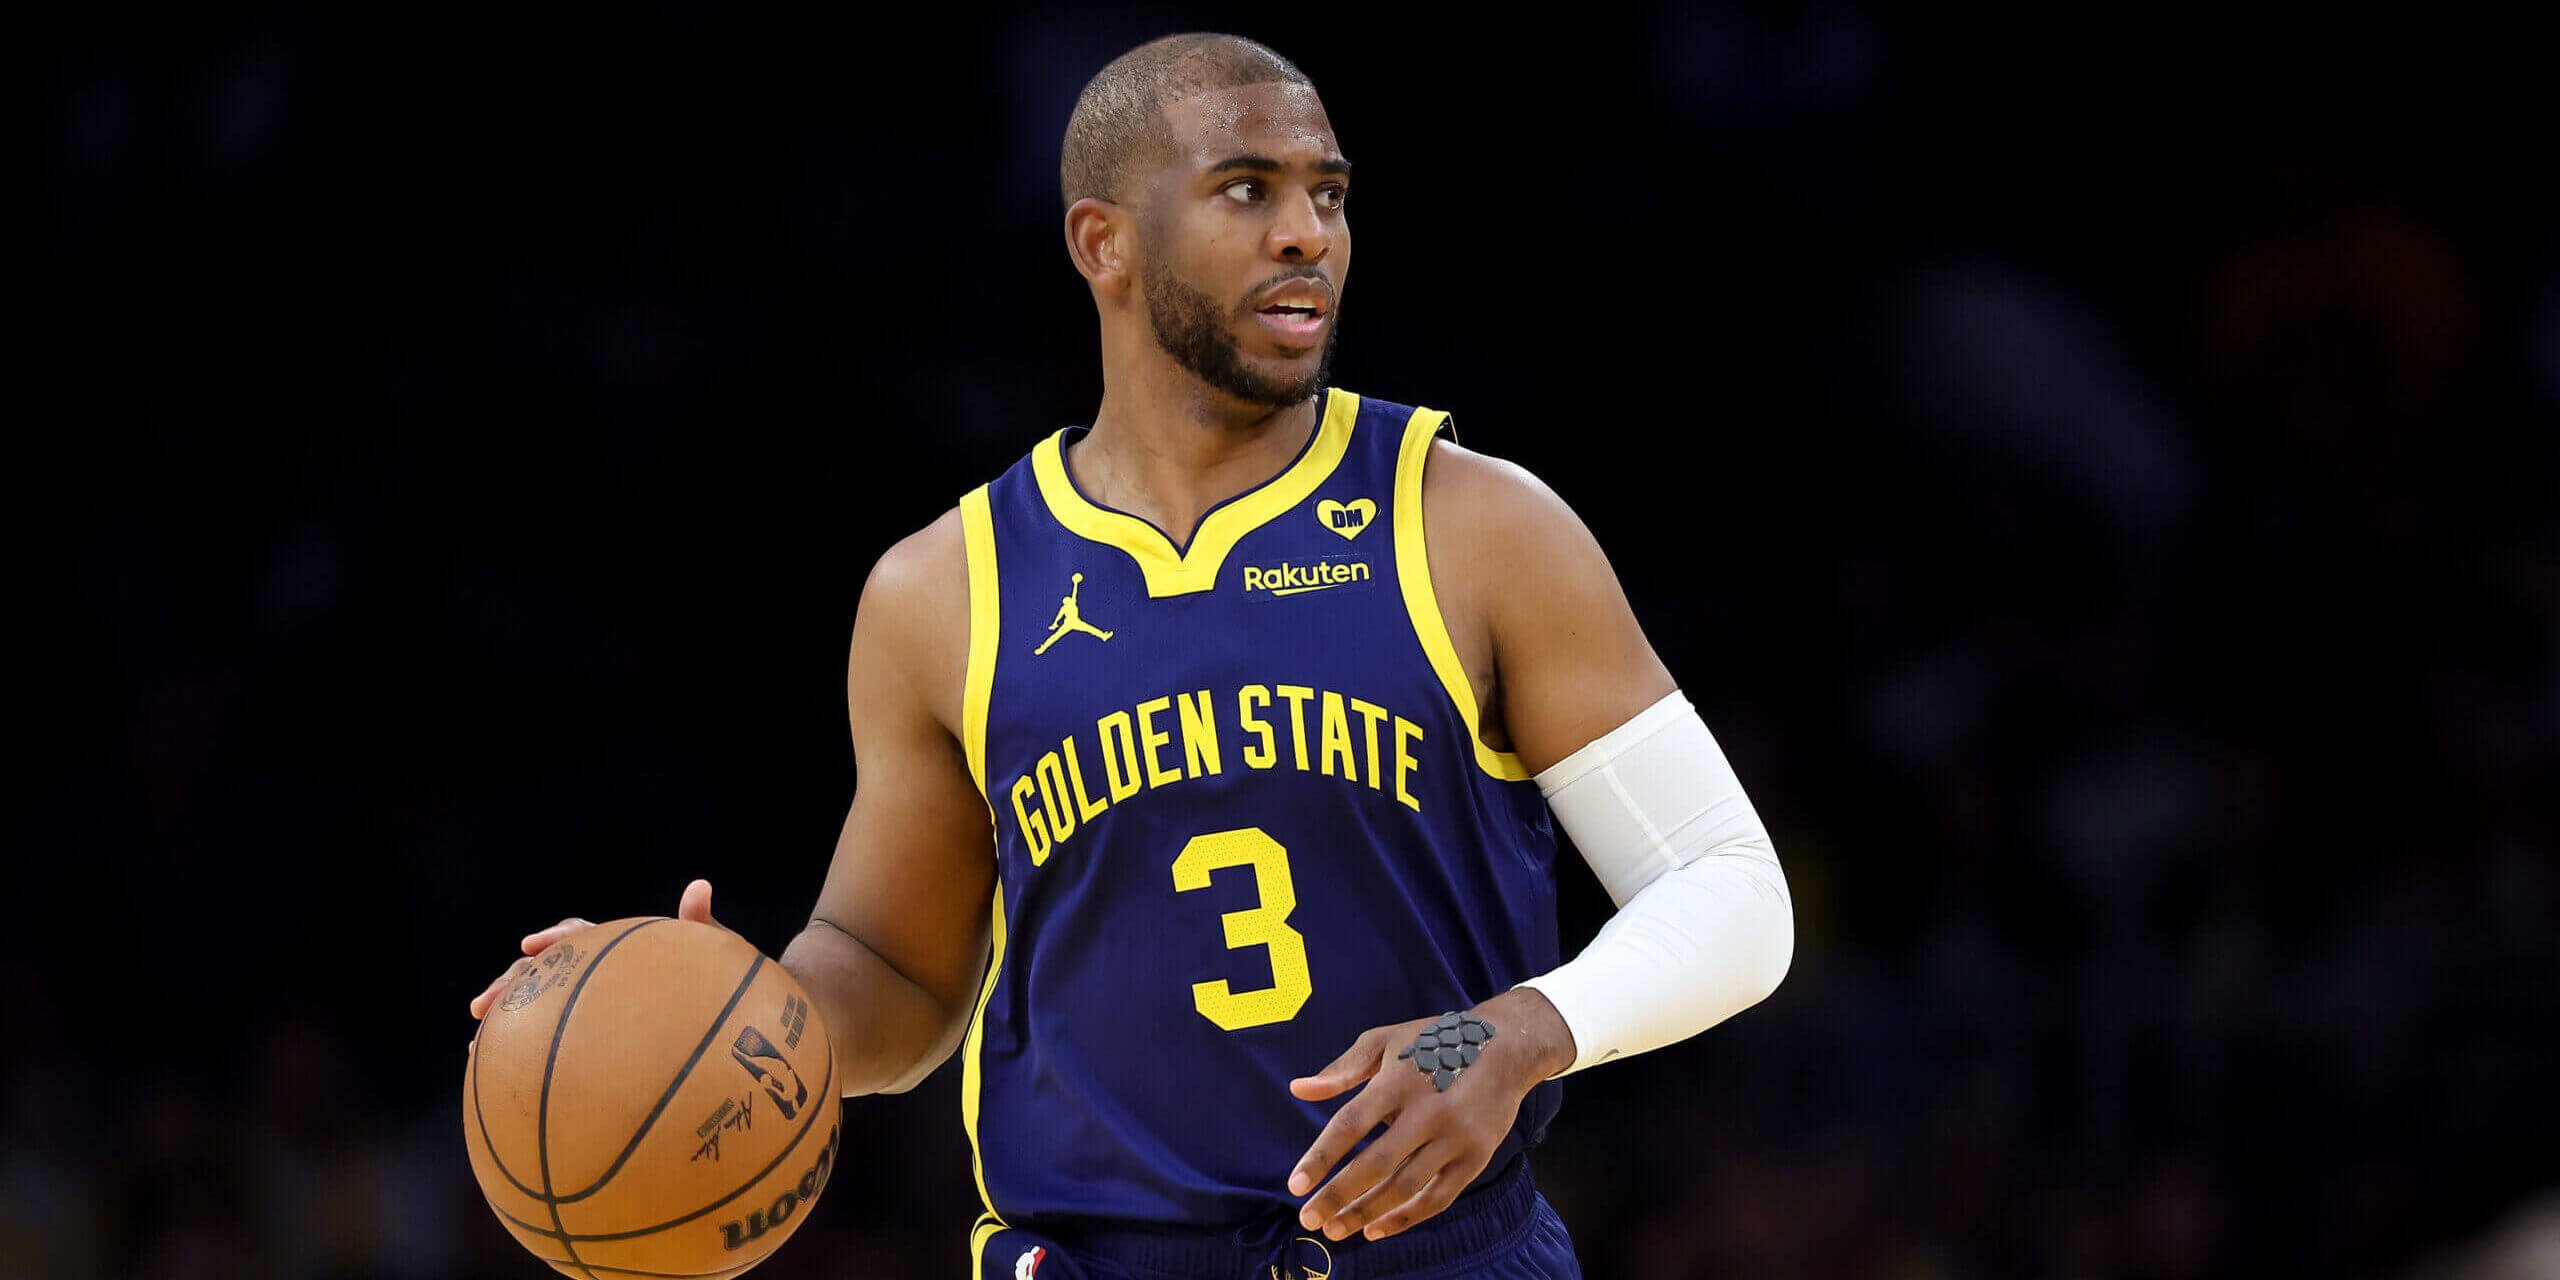 Chris Paul said he's not retiring, but is there a future with the Warriors?